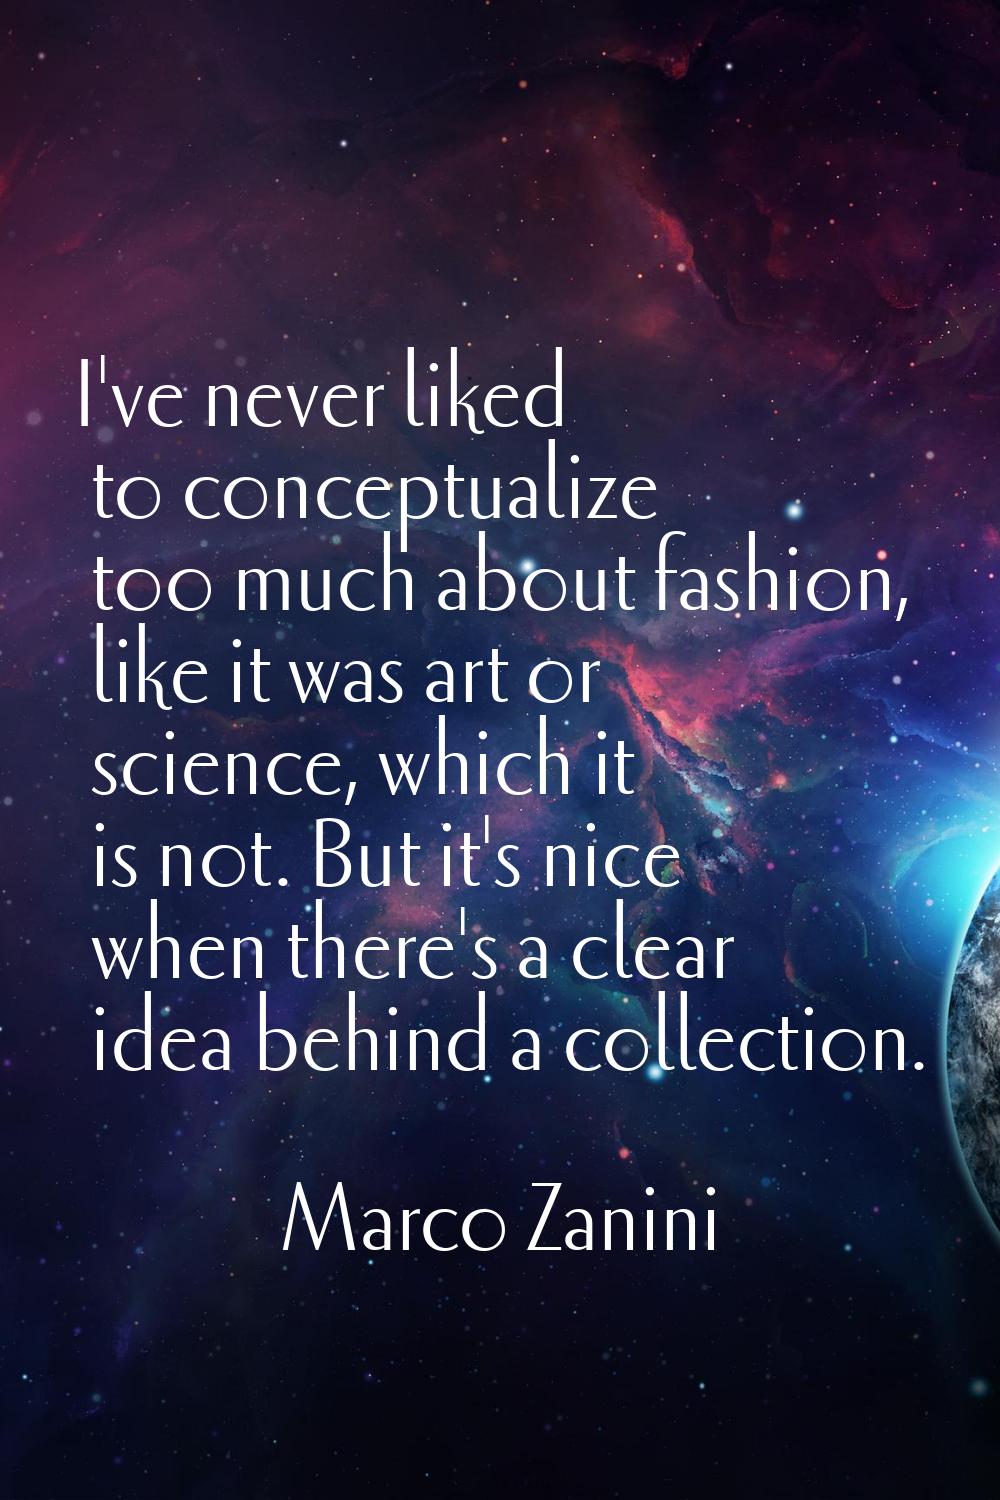 I've never liked to conceptualize too much about fashion, like it was art or science, which it is n